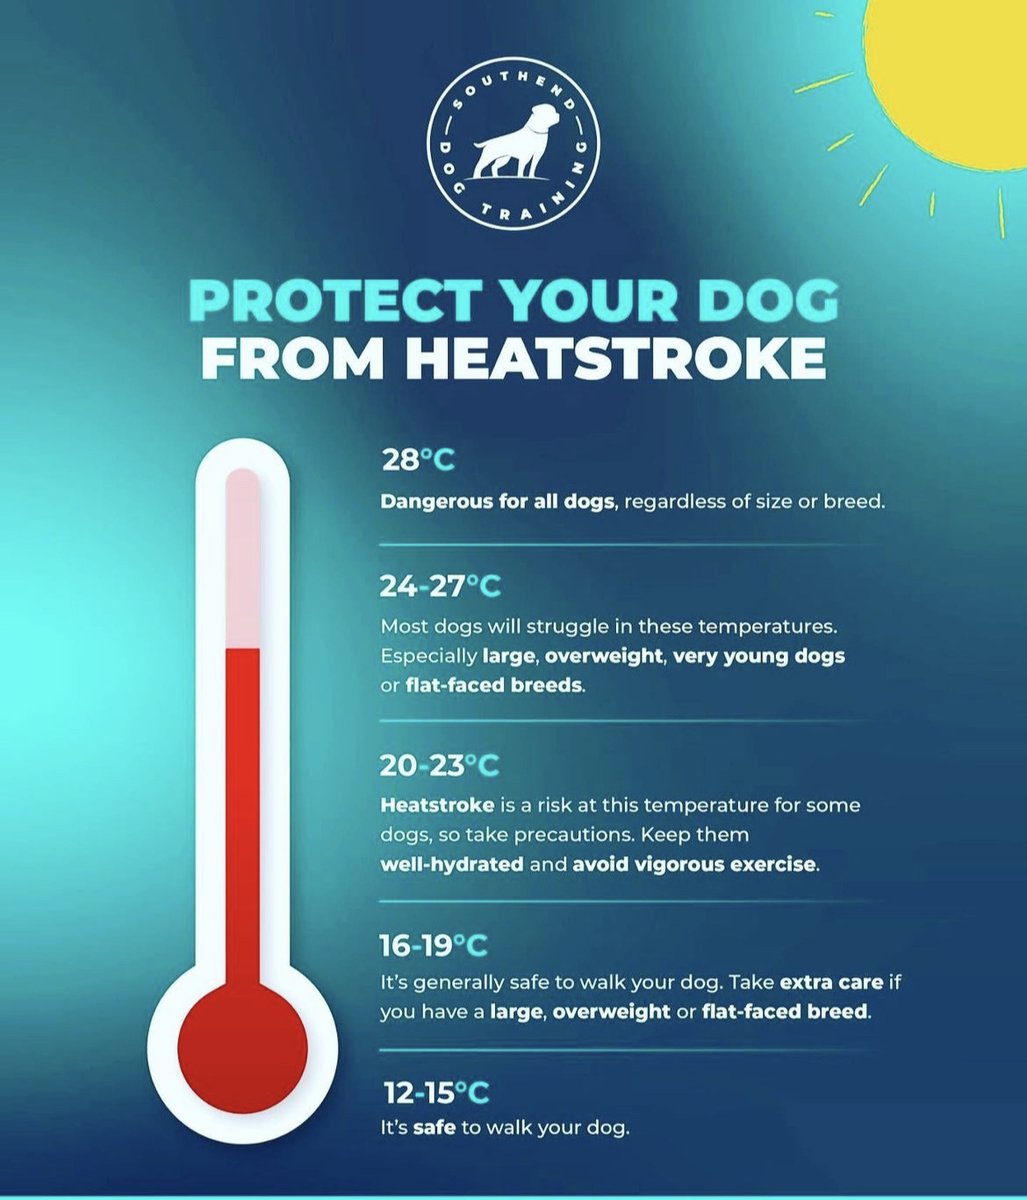 Walk them very early or very late. No dog ever died from missing the odd walk, they do die from heatstroke! 
#BeResponsible #dogsheatsroke #Domarncreative🐾